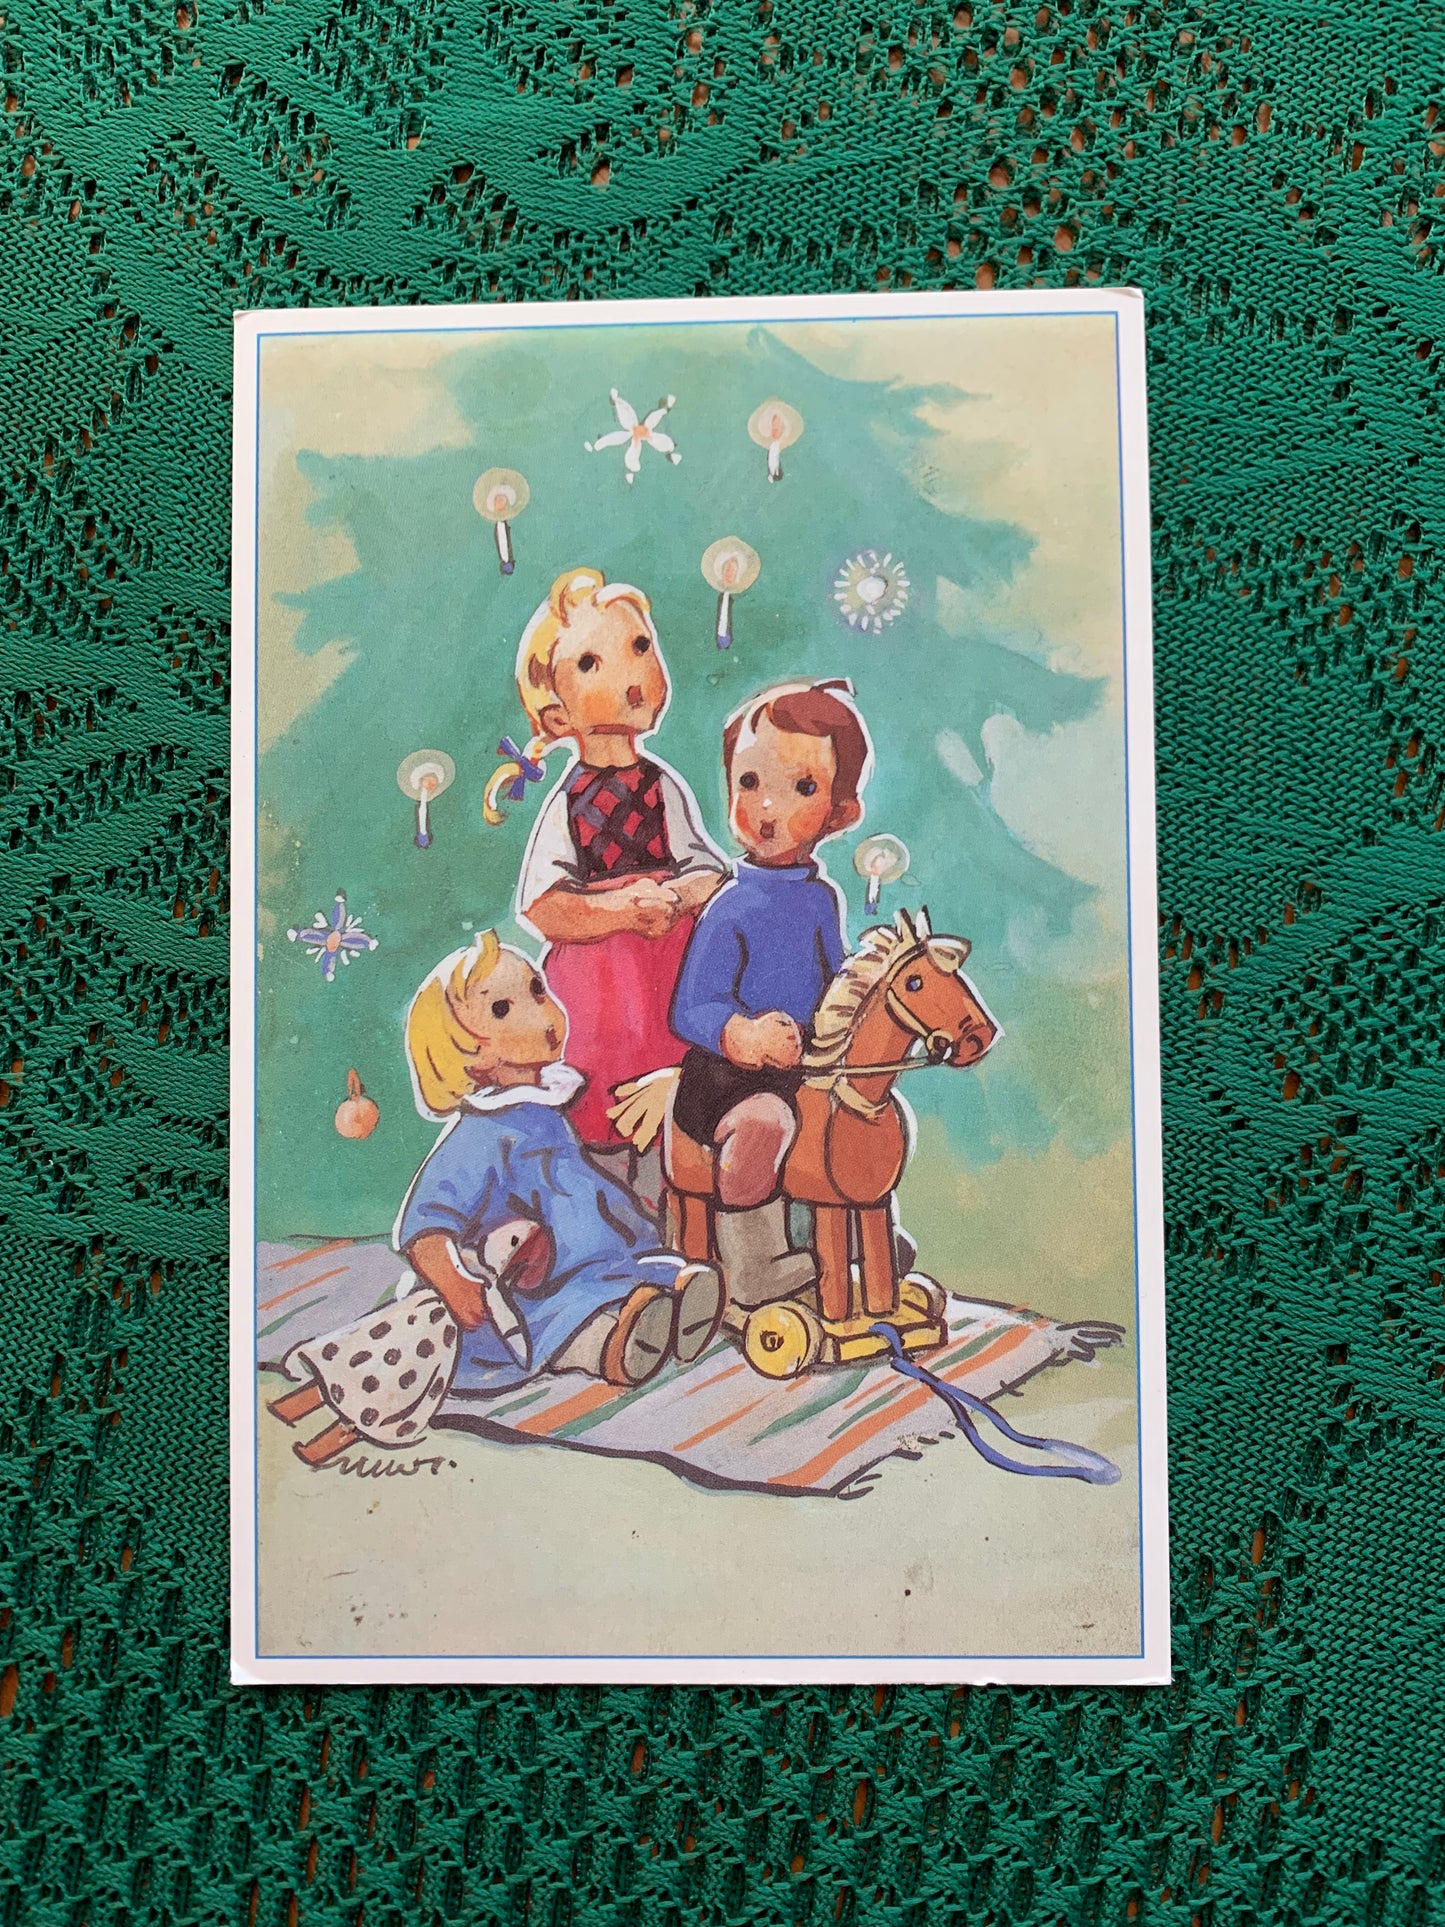 Finnish art postcard - Martta Wendelin series - Christmas card - Printed in Finland - Greeting card, collectible postcard - 1990 - unused